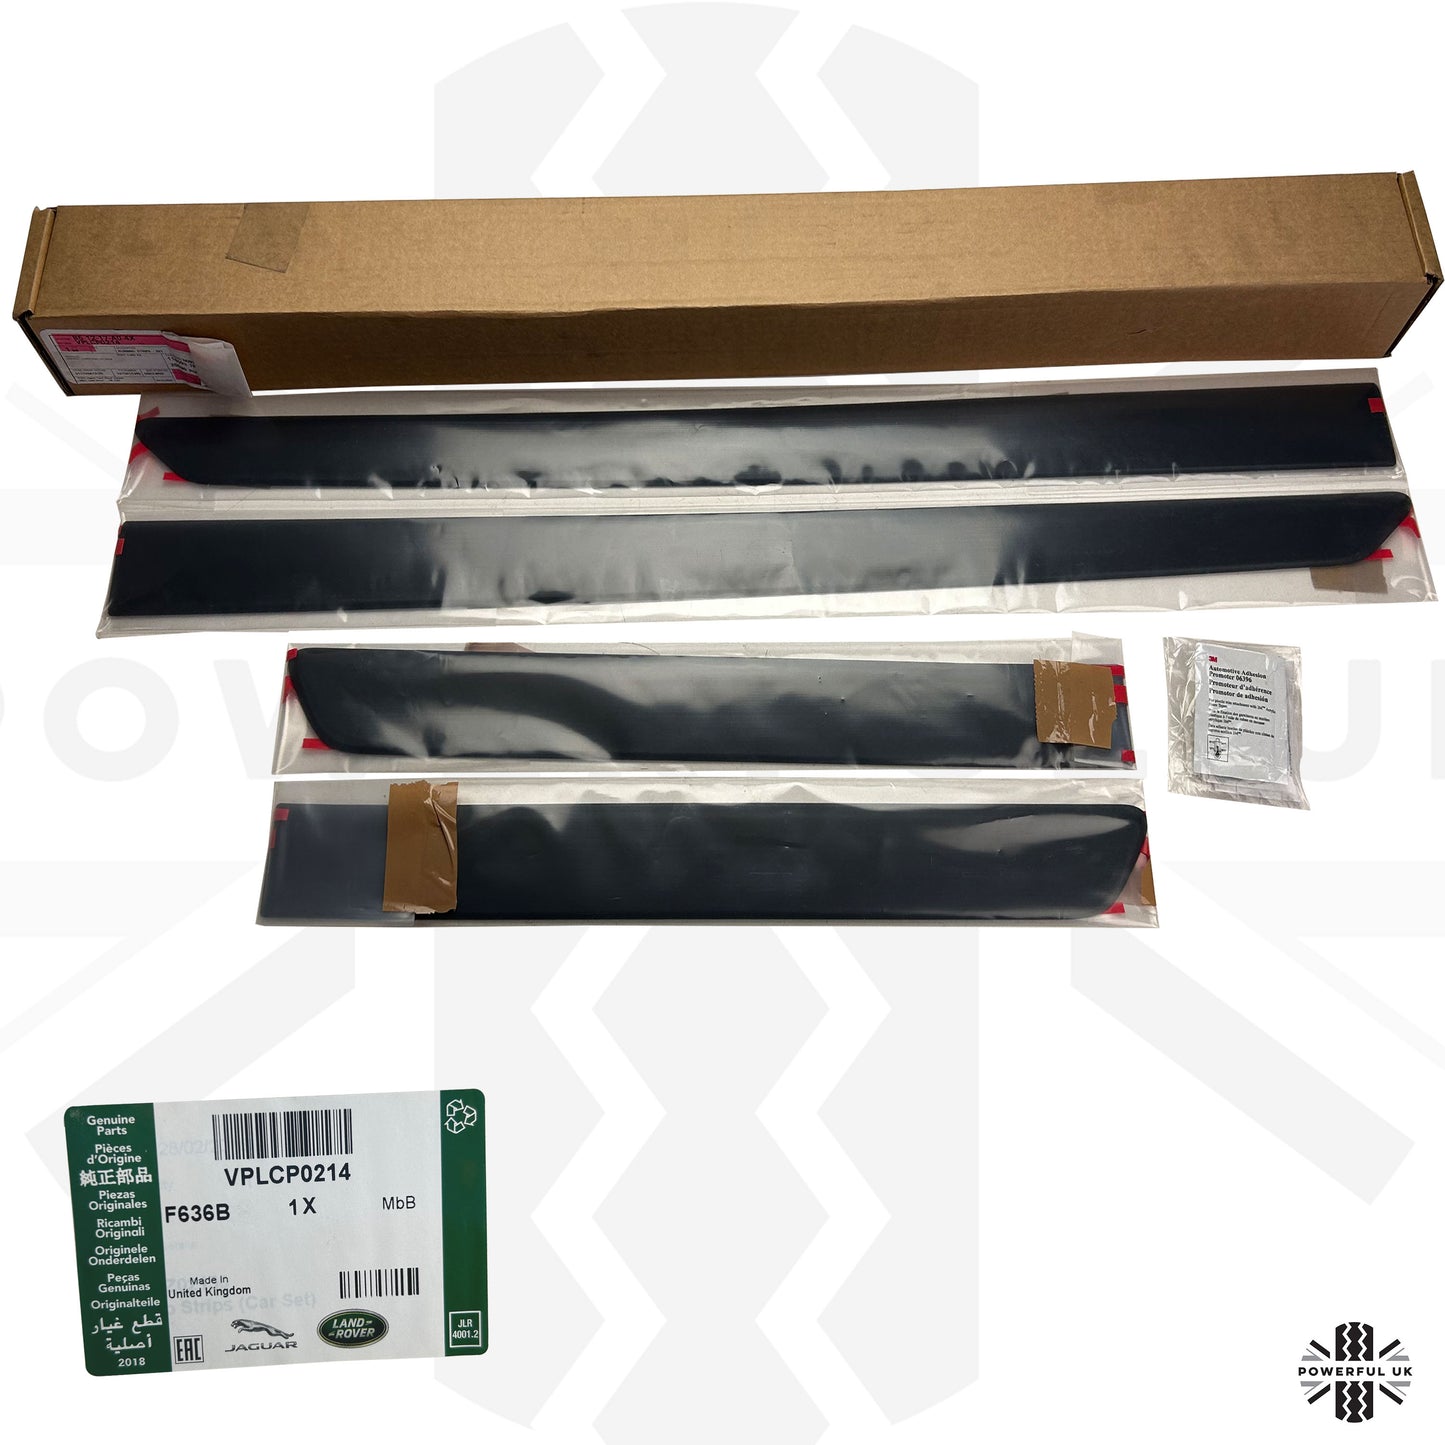 Genuine Black Door Rubbing Strips for Land Rover Discovery Sport (4pc)